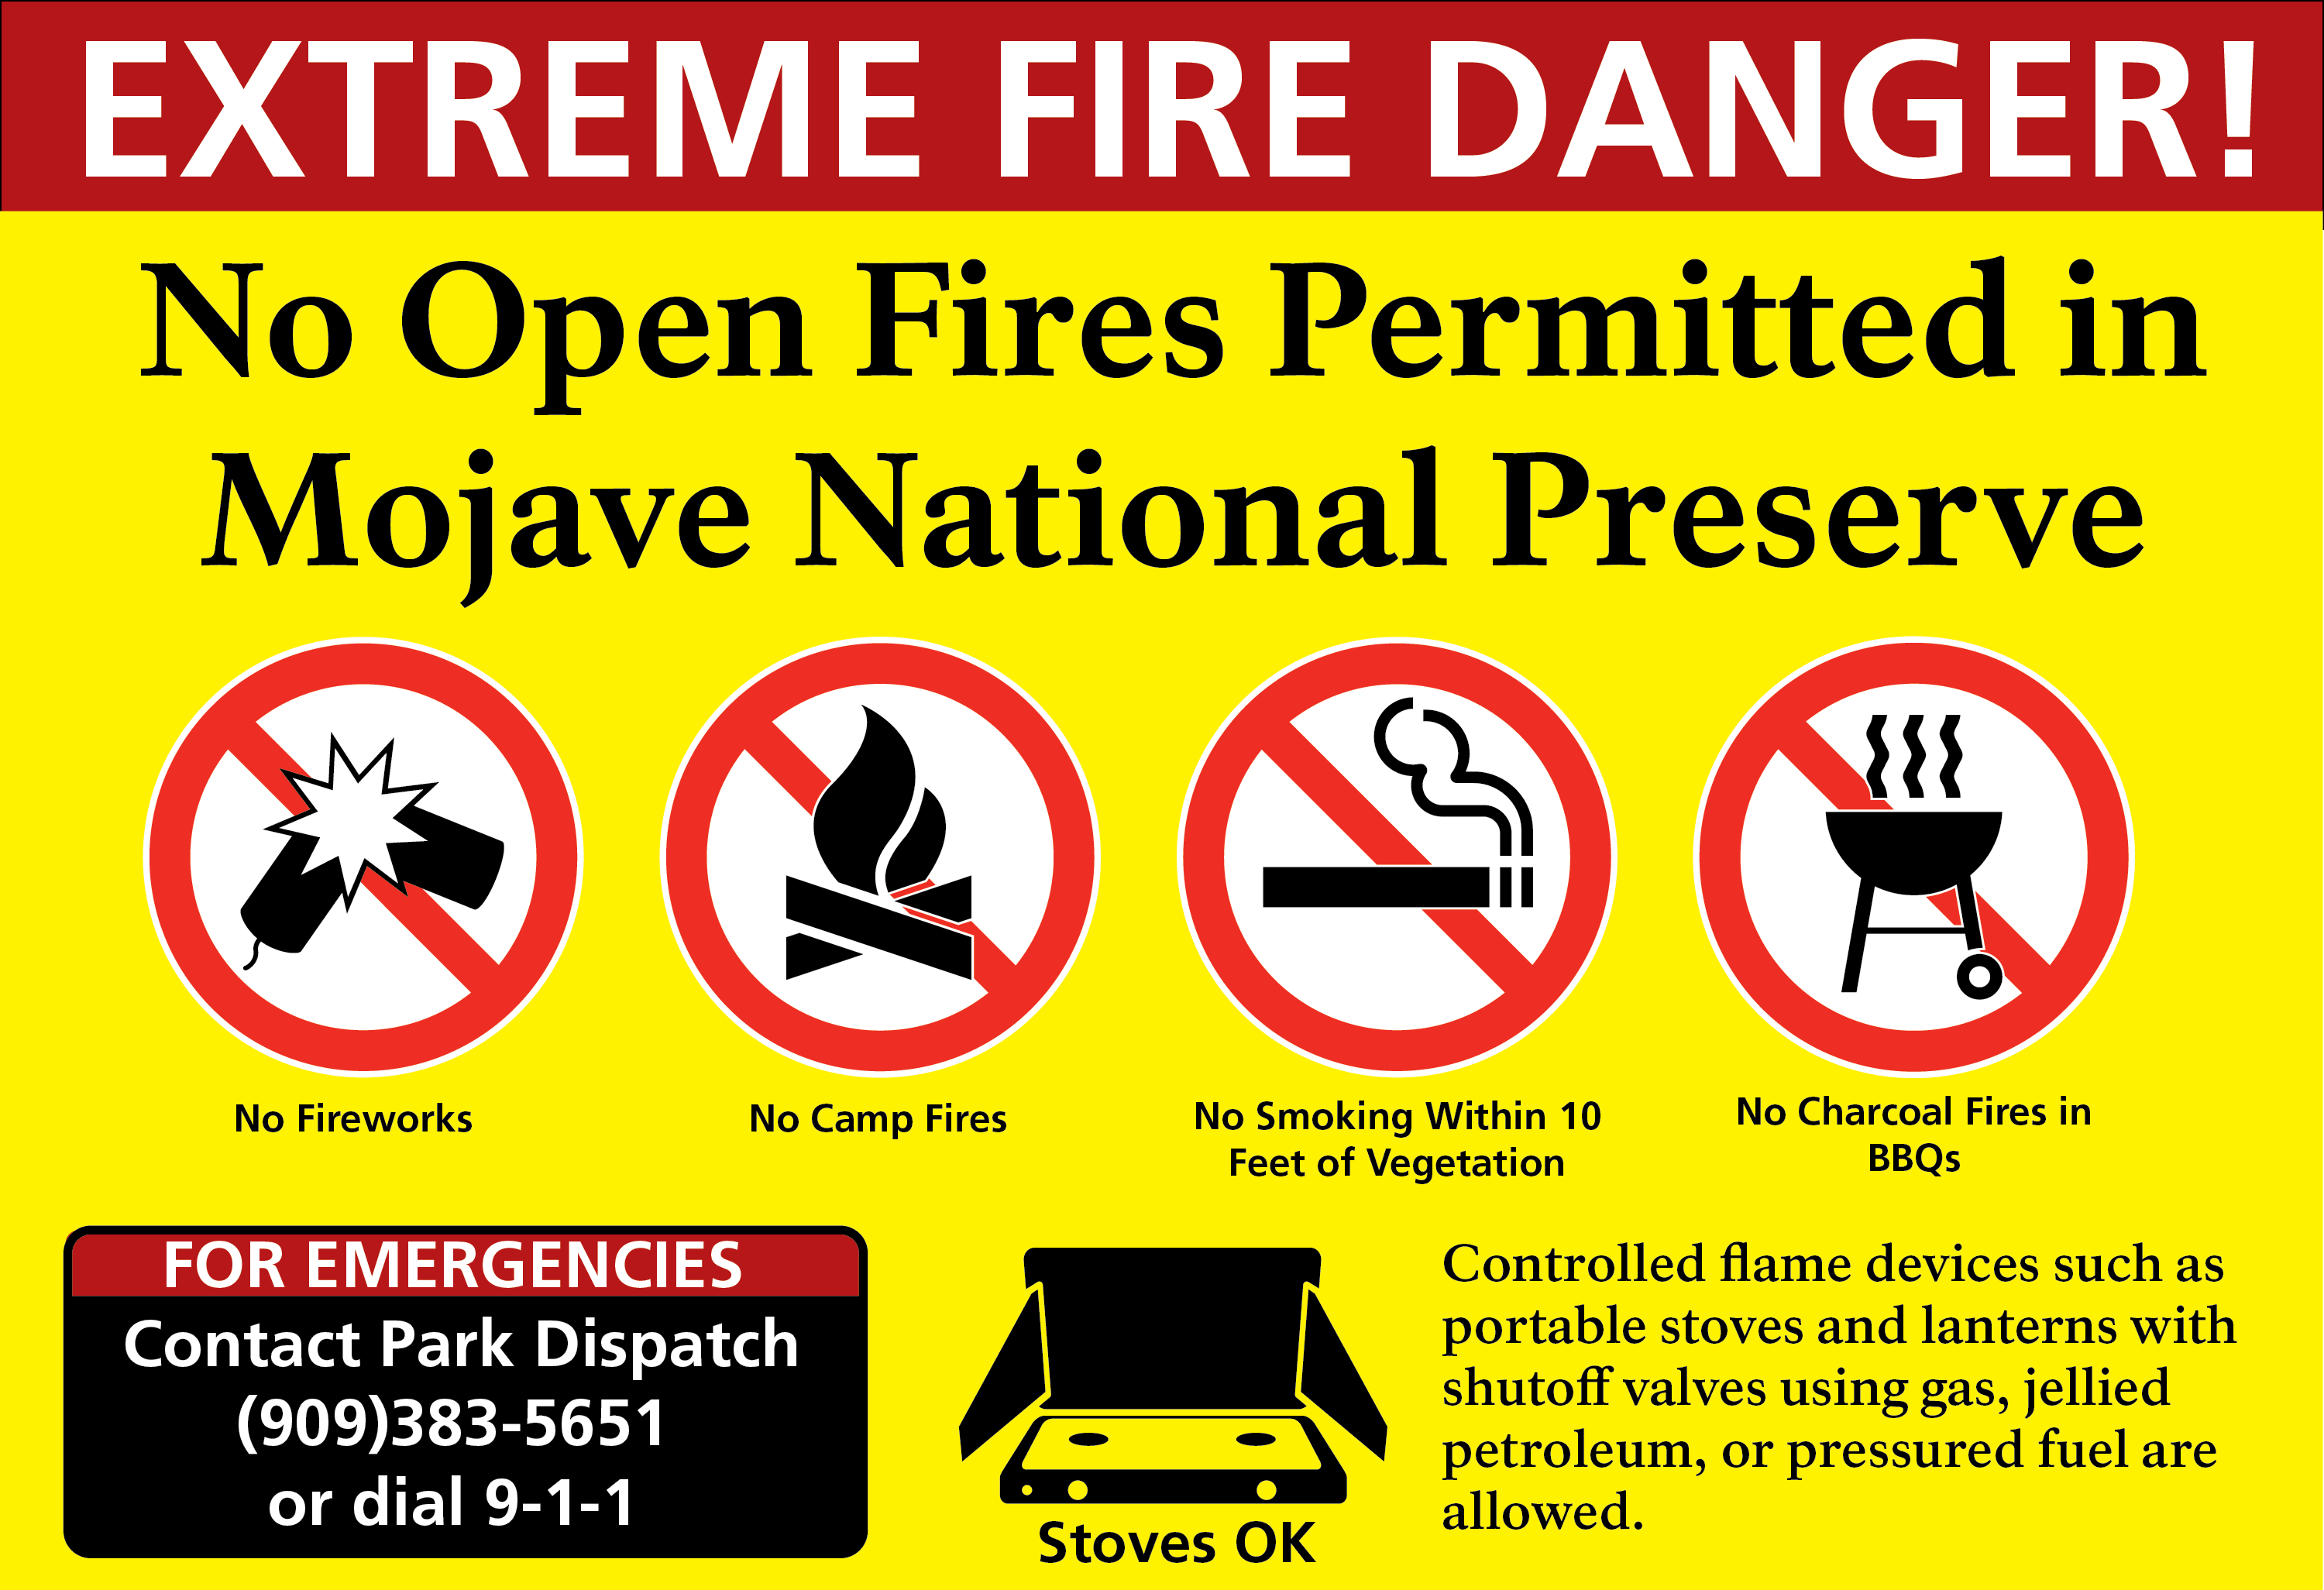 EXTREME FIRE DANGER sign reading No Open Fires permitted in Mojave National Preserve. Logos with red slash for fireworks campfires smoking and BBQs Controlled flames like Stoves Okay.